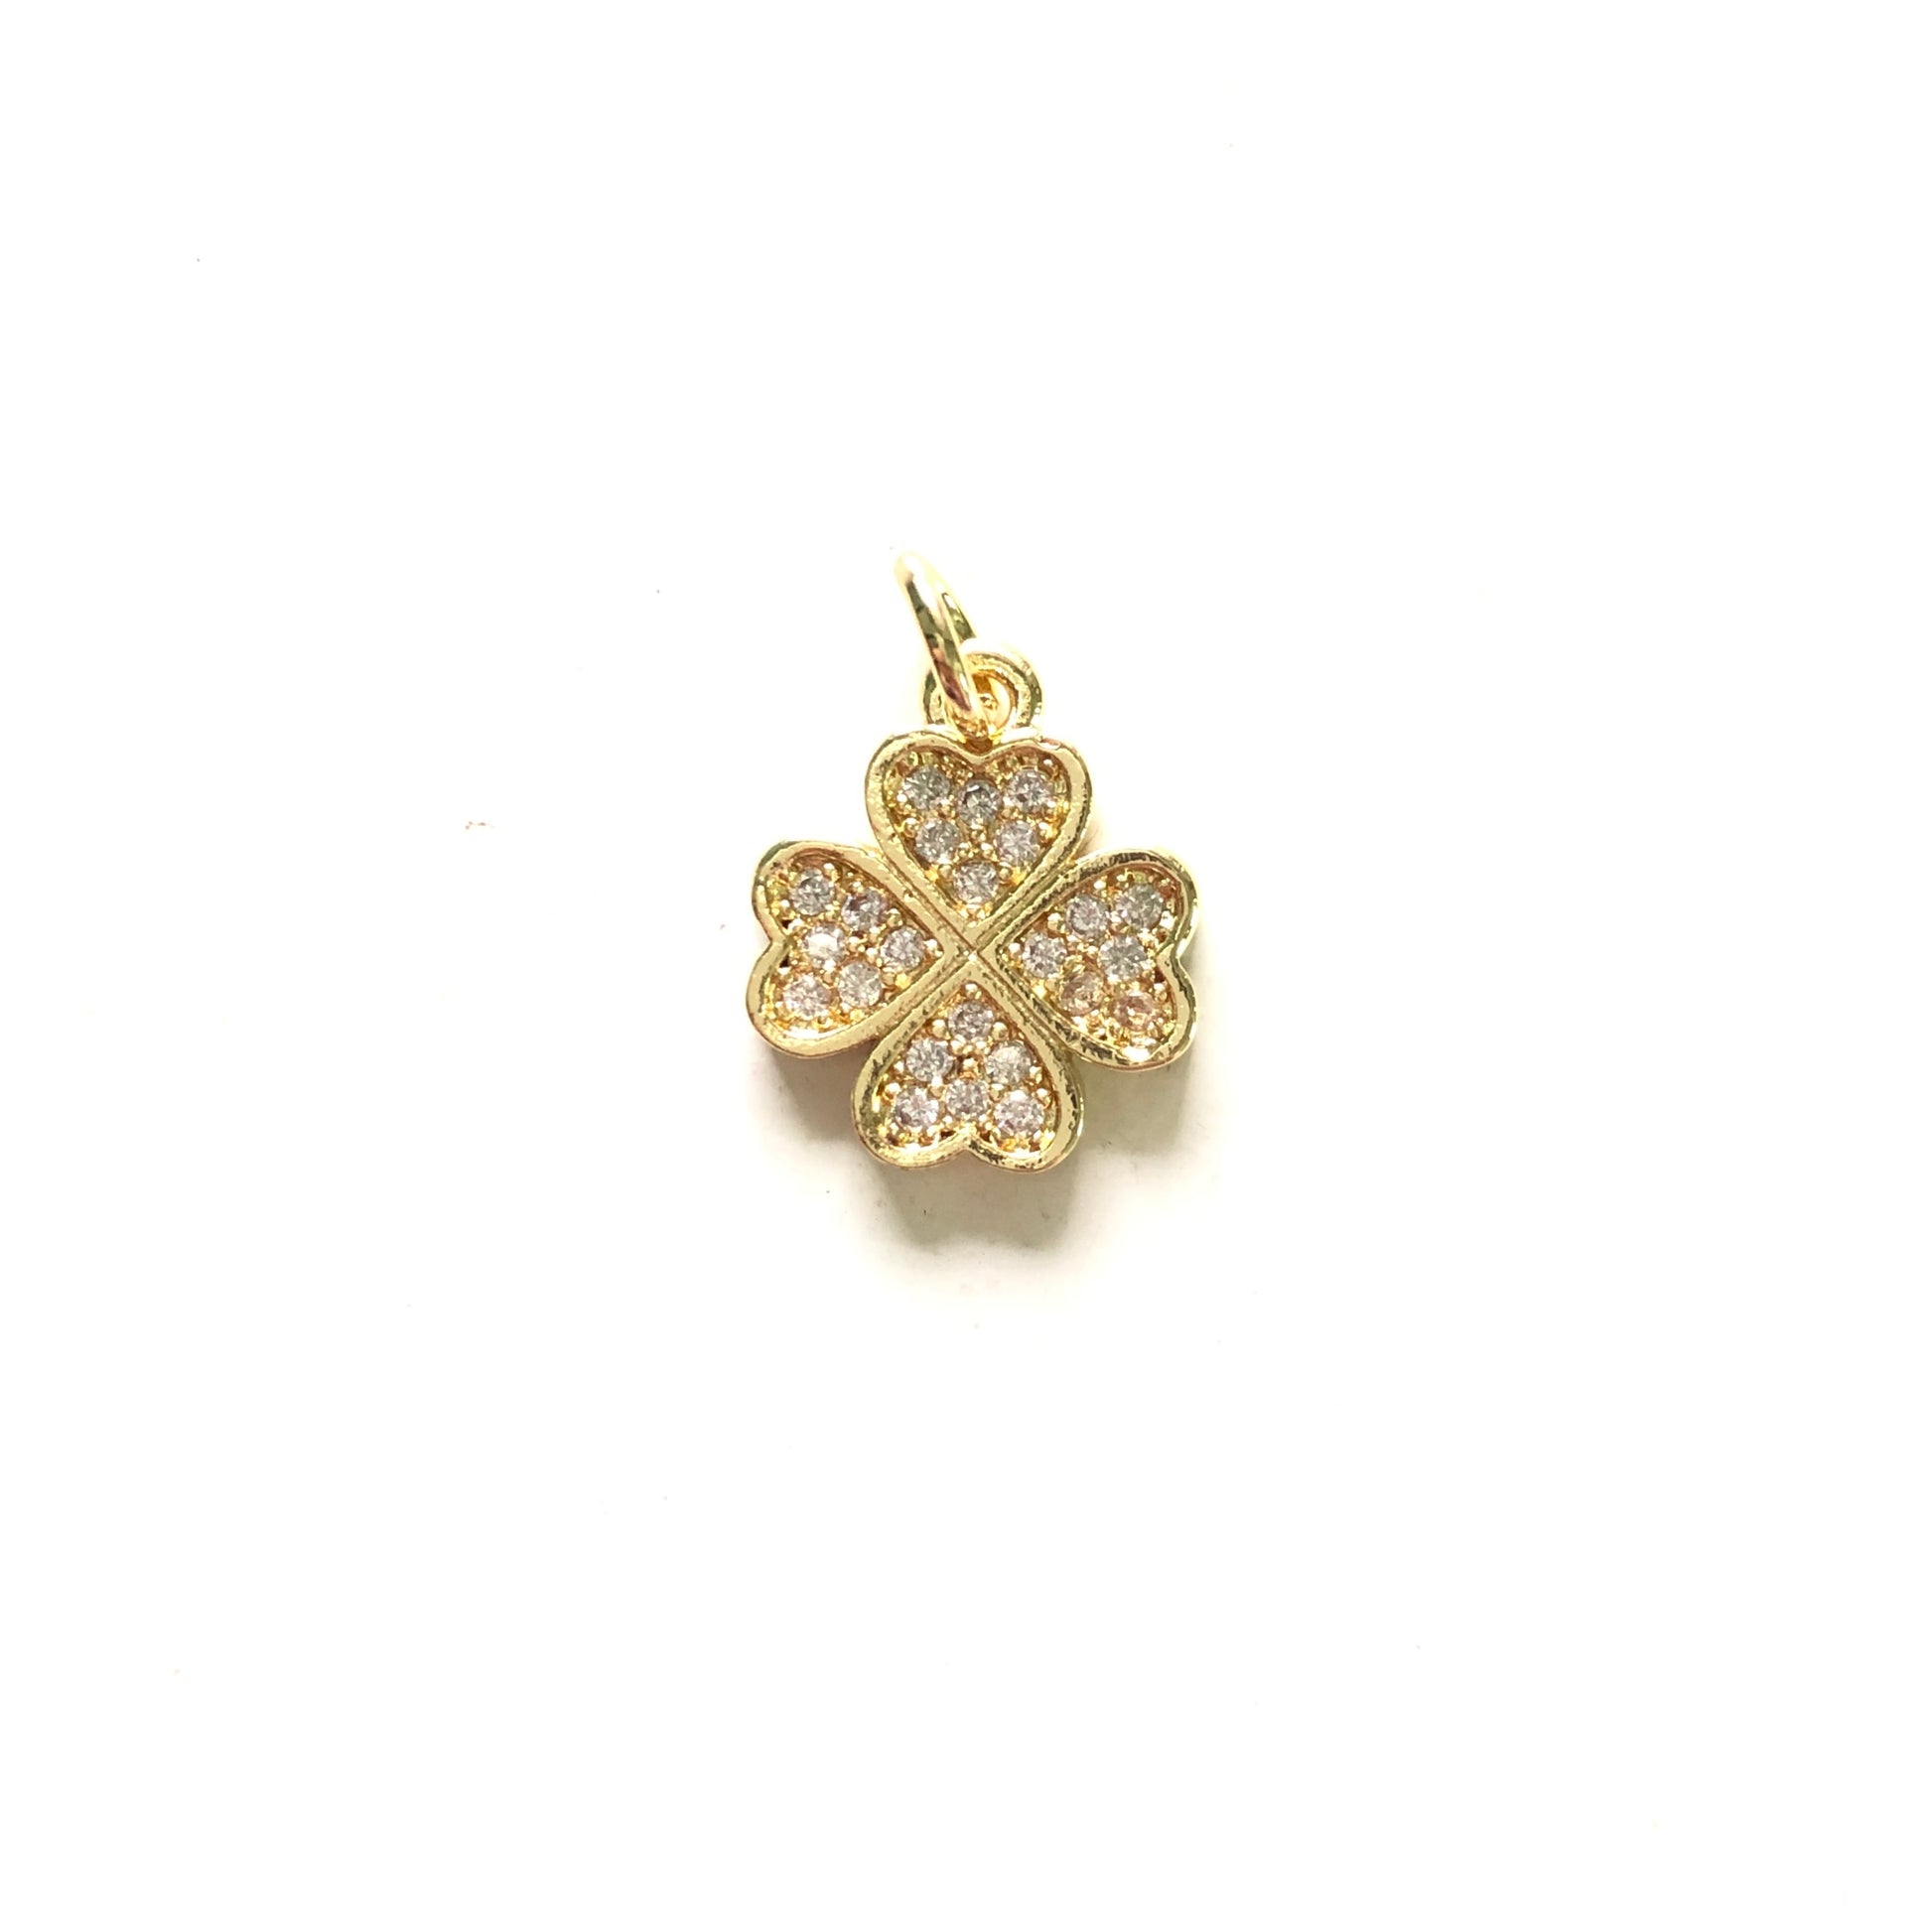 10pcs/lot 14*12mm Small Size CZ Pave Four Leaf Clover Charms Gold CZ Paved Charms Flowers Small Sizes Charms Beads Beyond